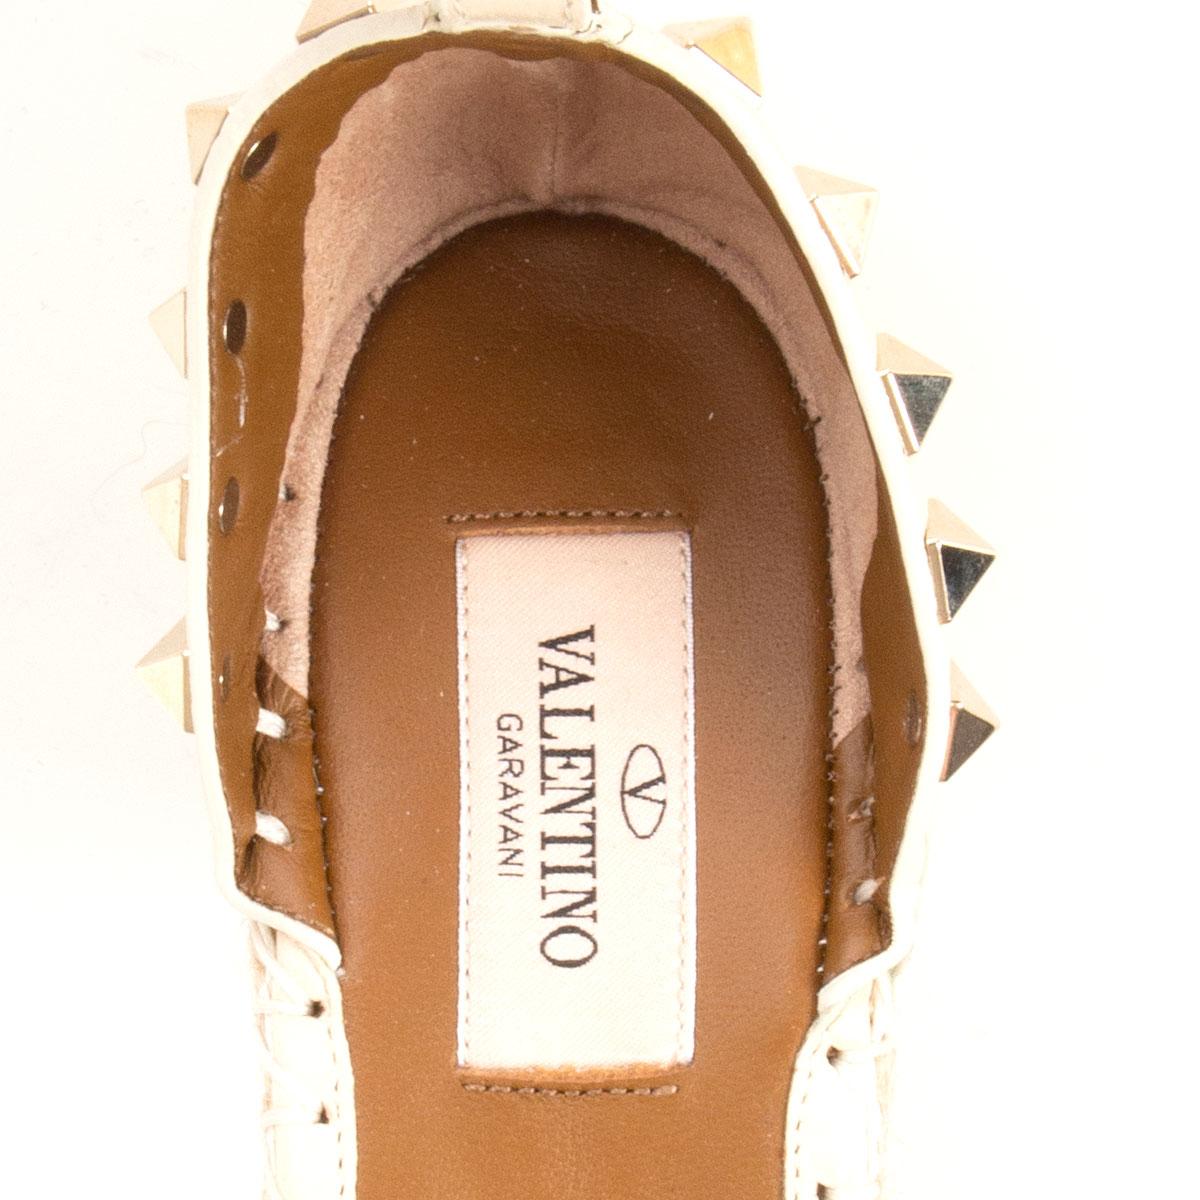 Women's VALENTINO cream white leather ROCKSTUD Wedge Sandals Shoes 36